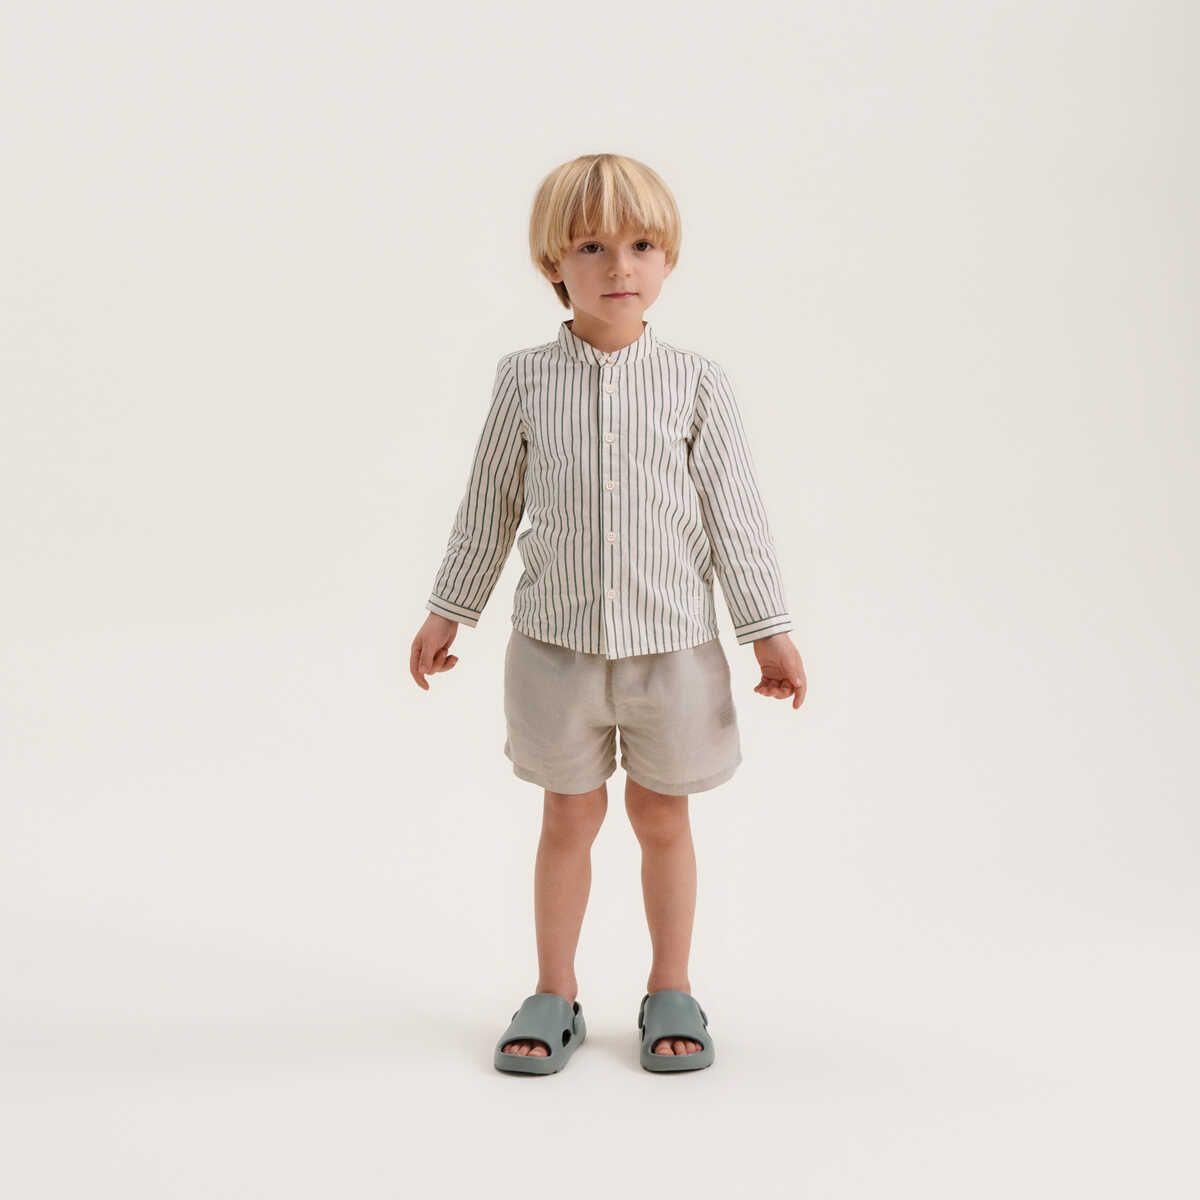 Leinenshorts Madison 'Mist' - The Little One • Family.Concept.Store. 